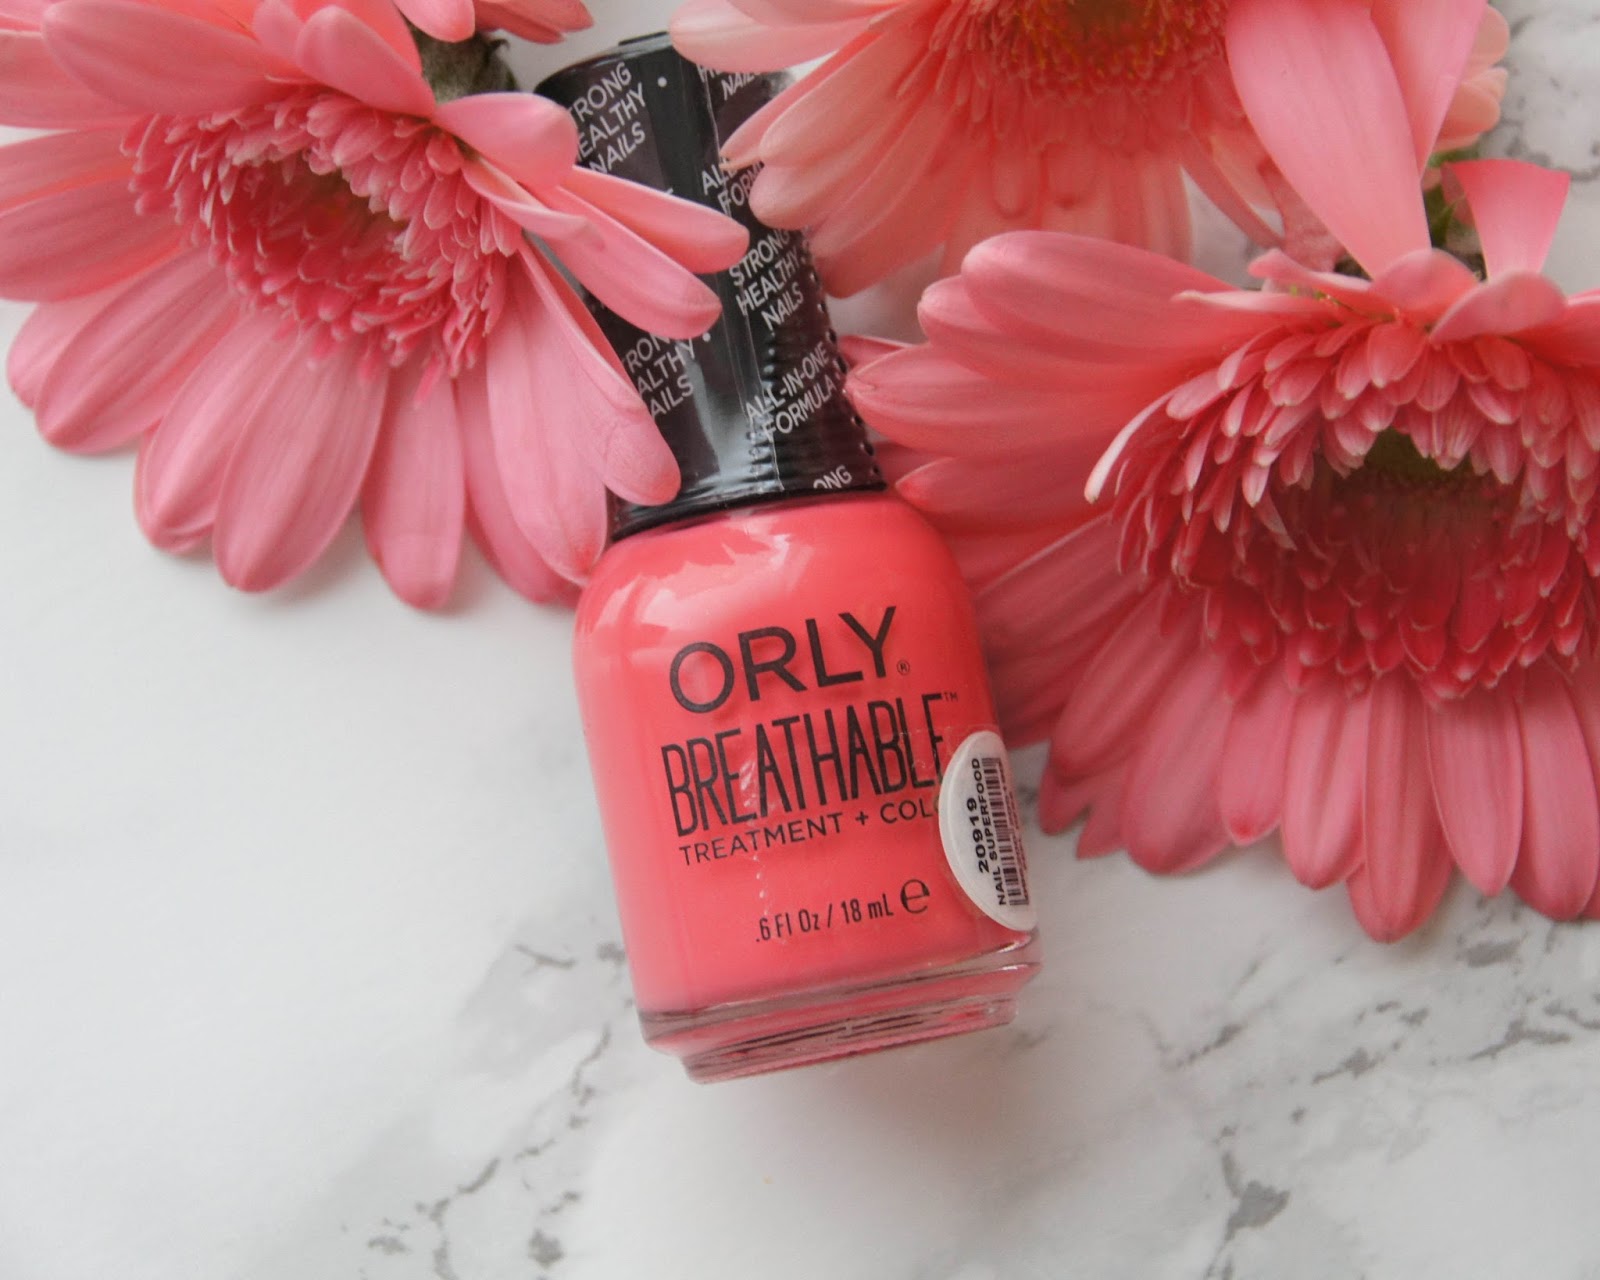 9. Orly Breathable Treatment + Color Nail Polish - wide 8